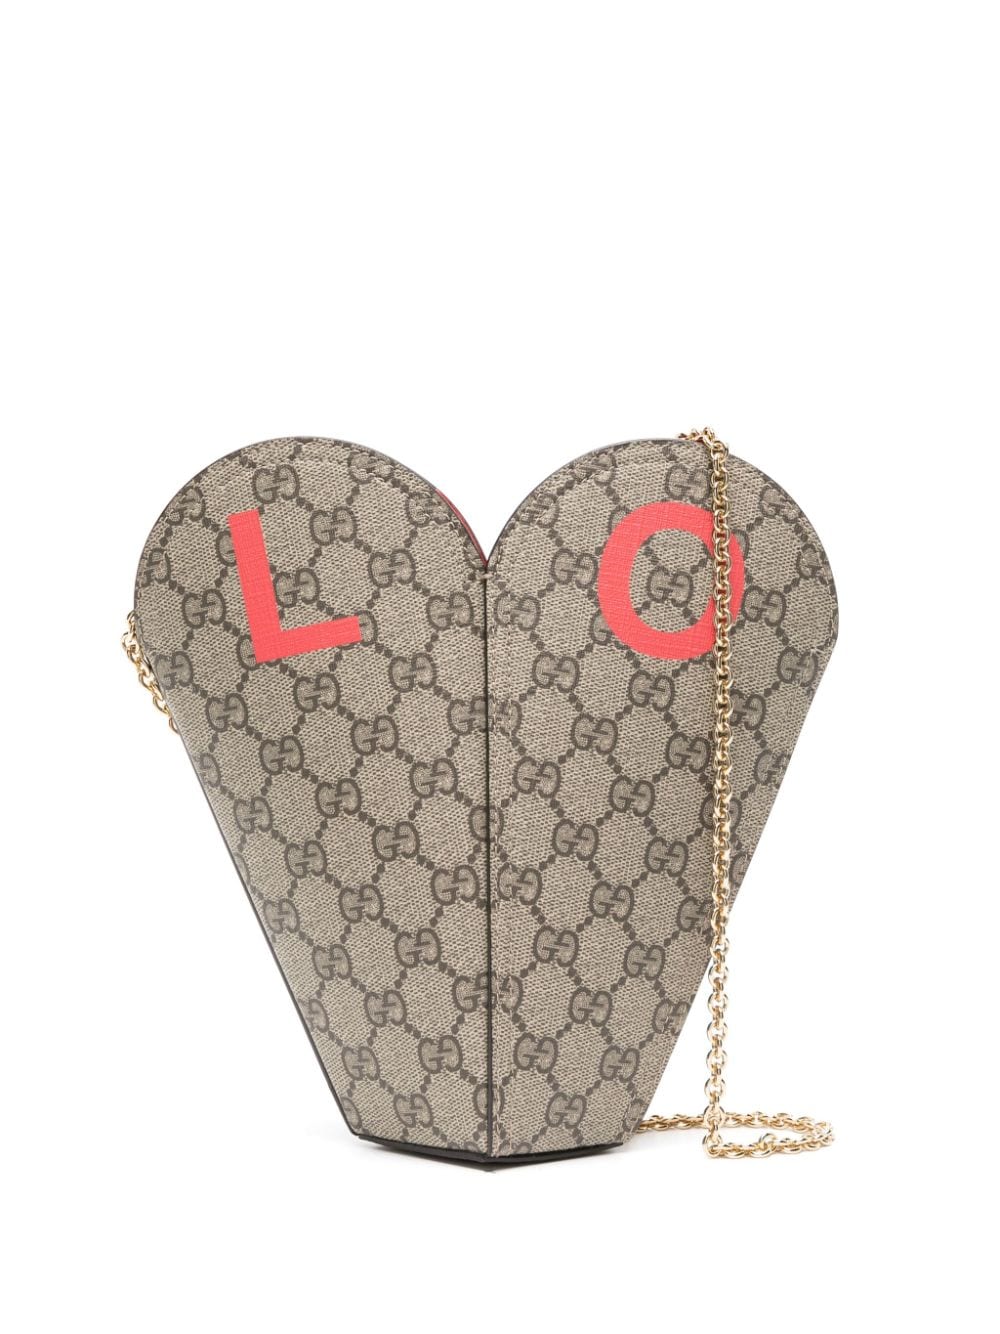 Pre-owned Gucci 2020 Valentine's Day Heart Leather Bag In Brown